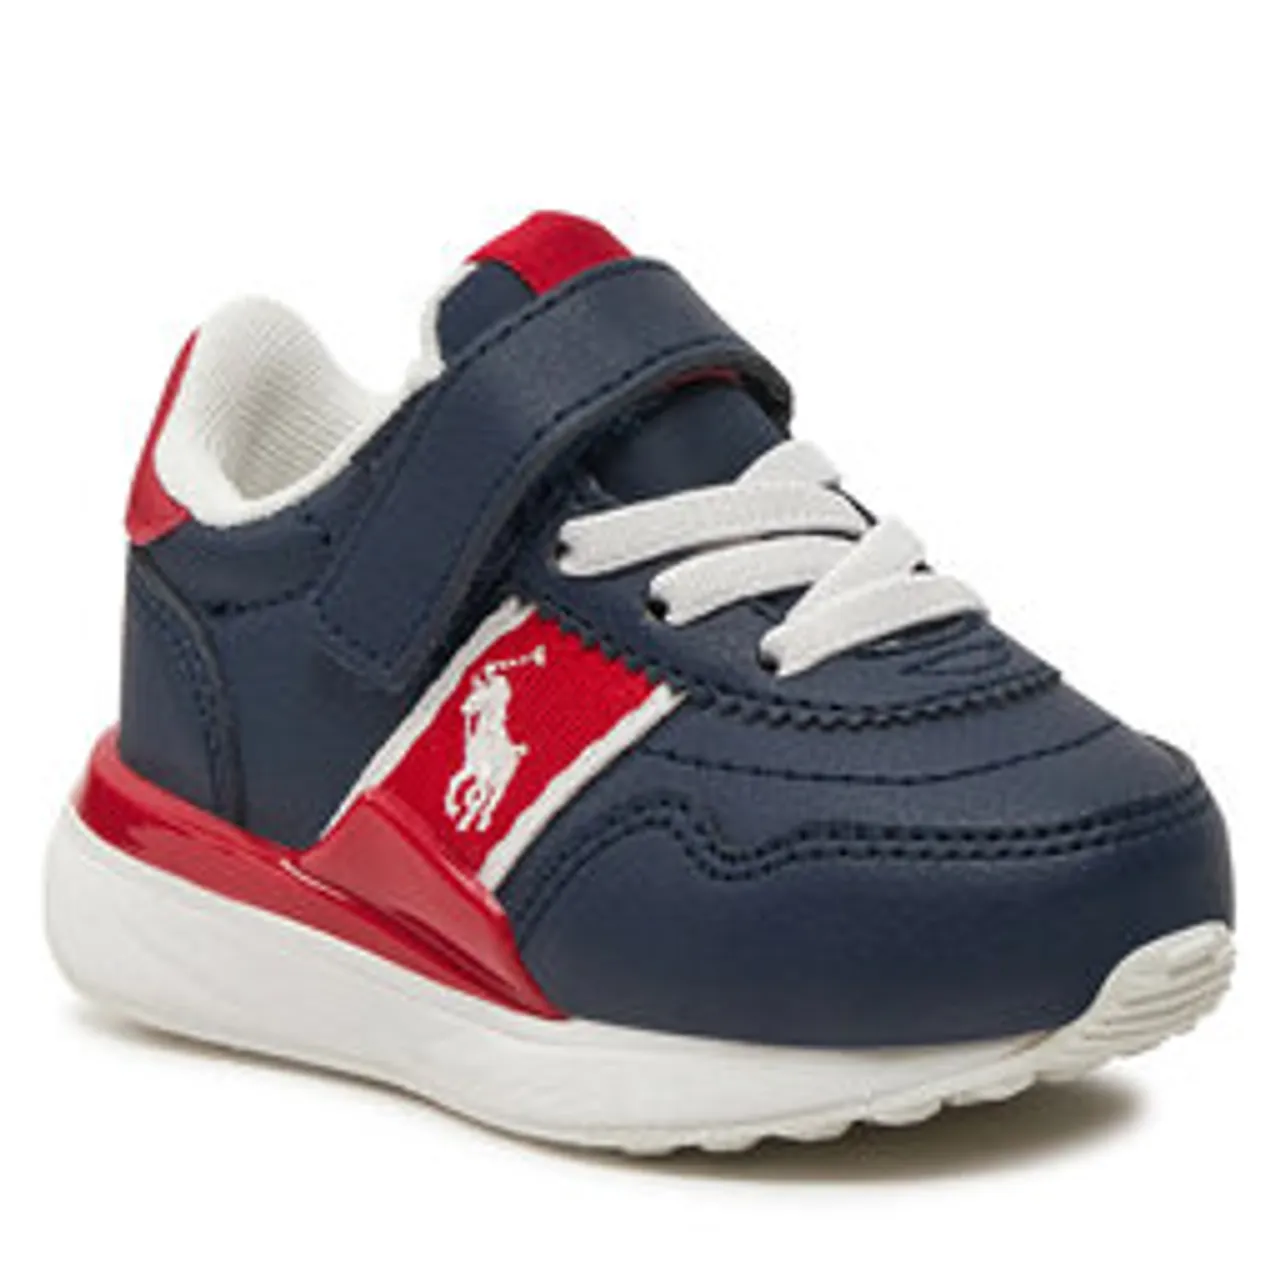 Sneakers Polo Ralph Lauren RL00295410 T Navy Tumbled/Red W/ White Pp